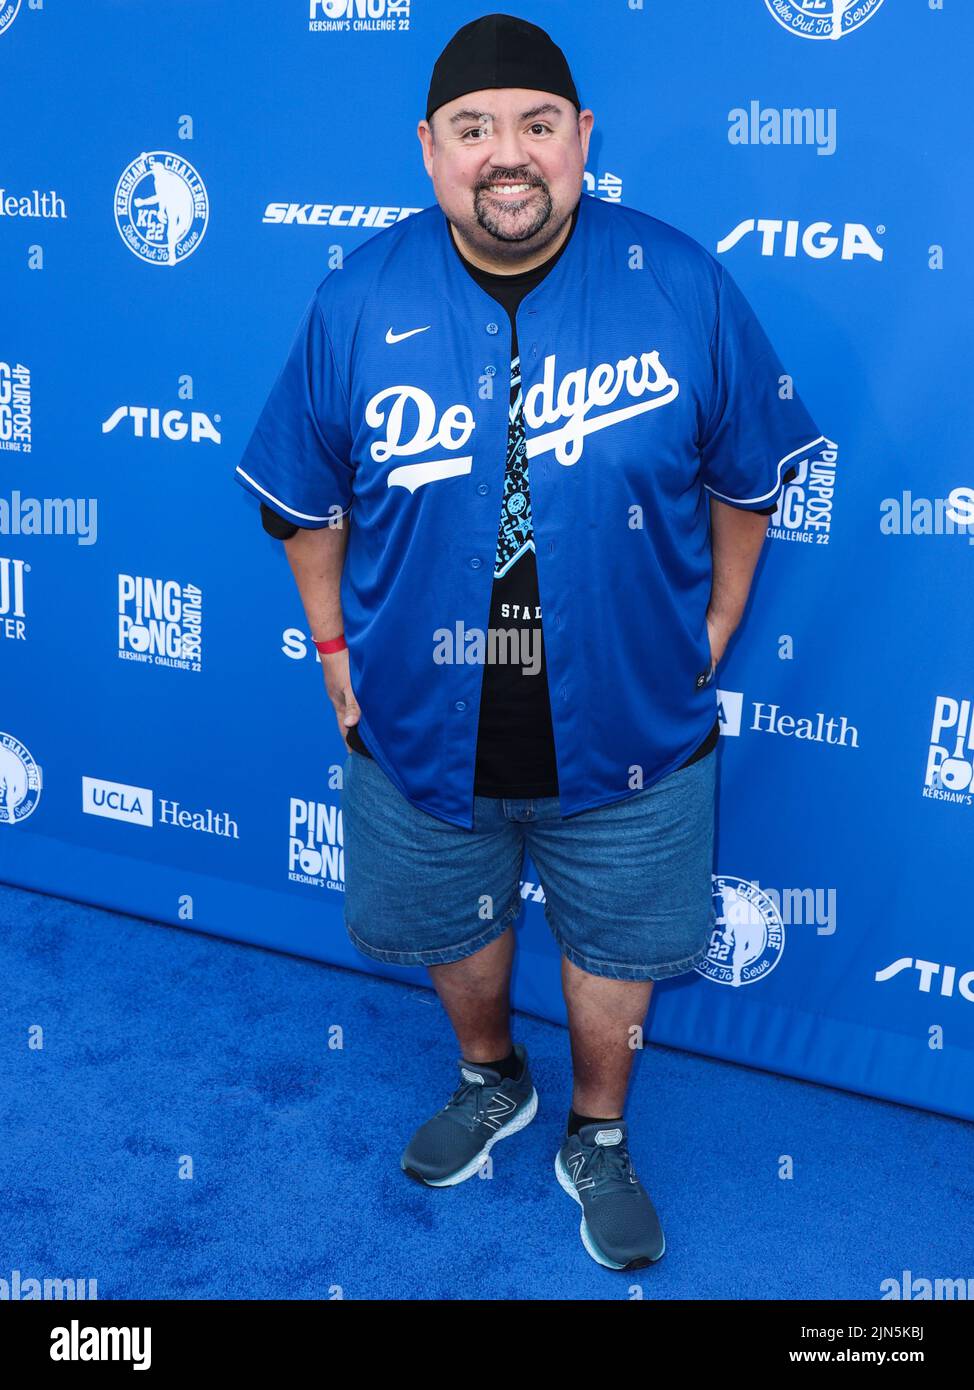 ELYSIAN PARK, LOS ANGELES, CALIFORNIA, USA - AUGUST 08: American comedian Gabriel Iglesias (Fluffy) arrives at Kershaw's Challenge Ping Pong 4 Purpose 2022 held at Dodger Stadium on August 8, 2022 in Elysian Park, Los Angeles, California, United States. (Photo by Xavier Collin/Image Press Agency) Stock Photo